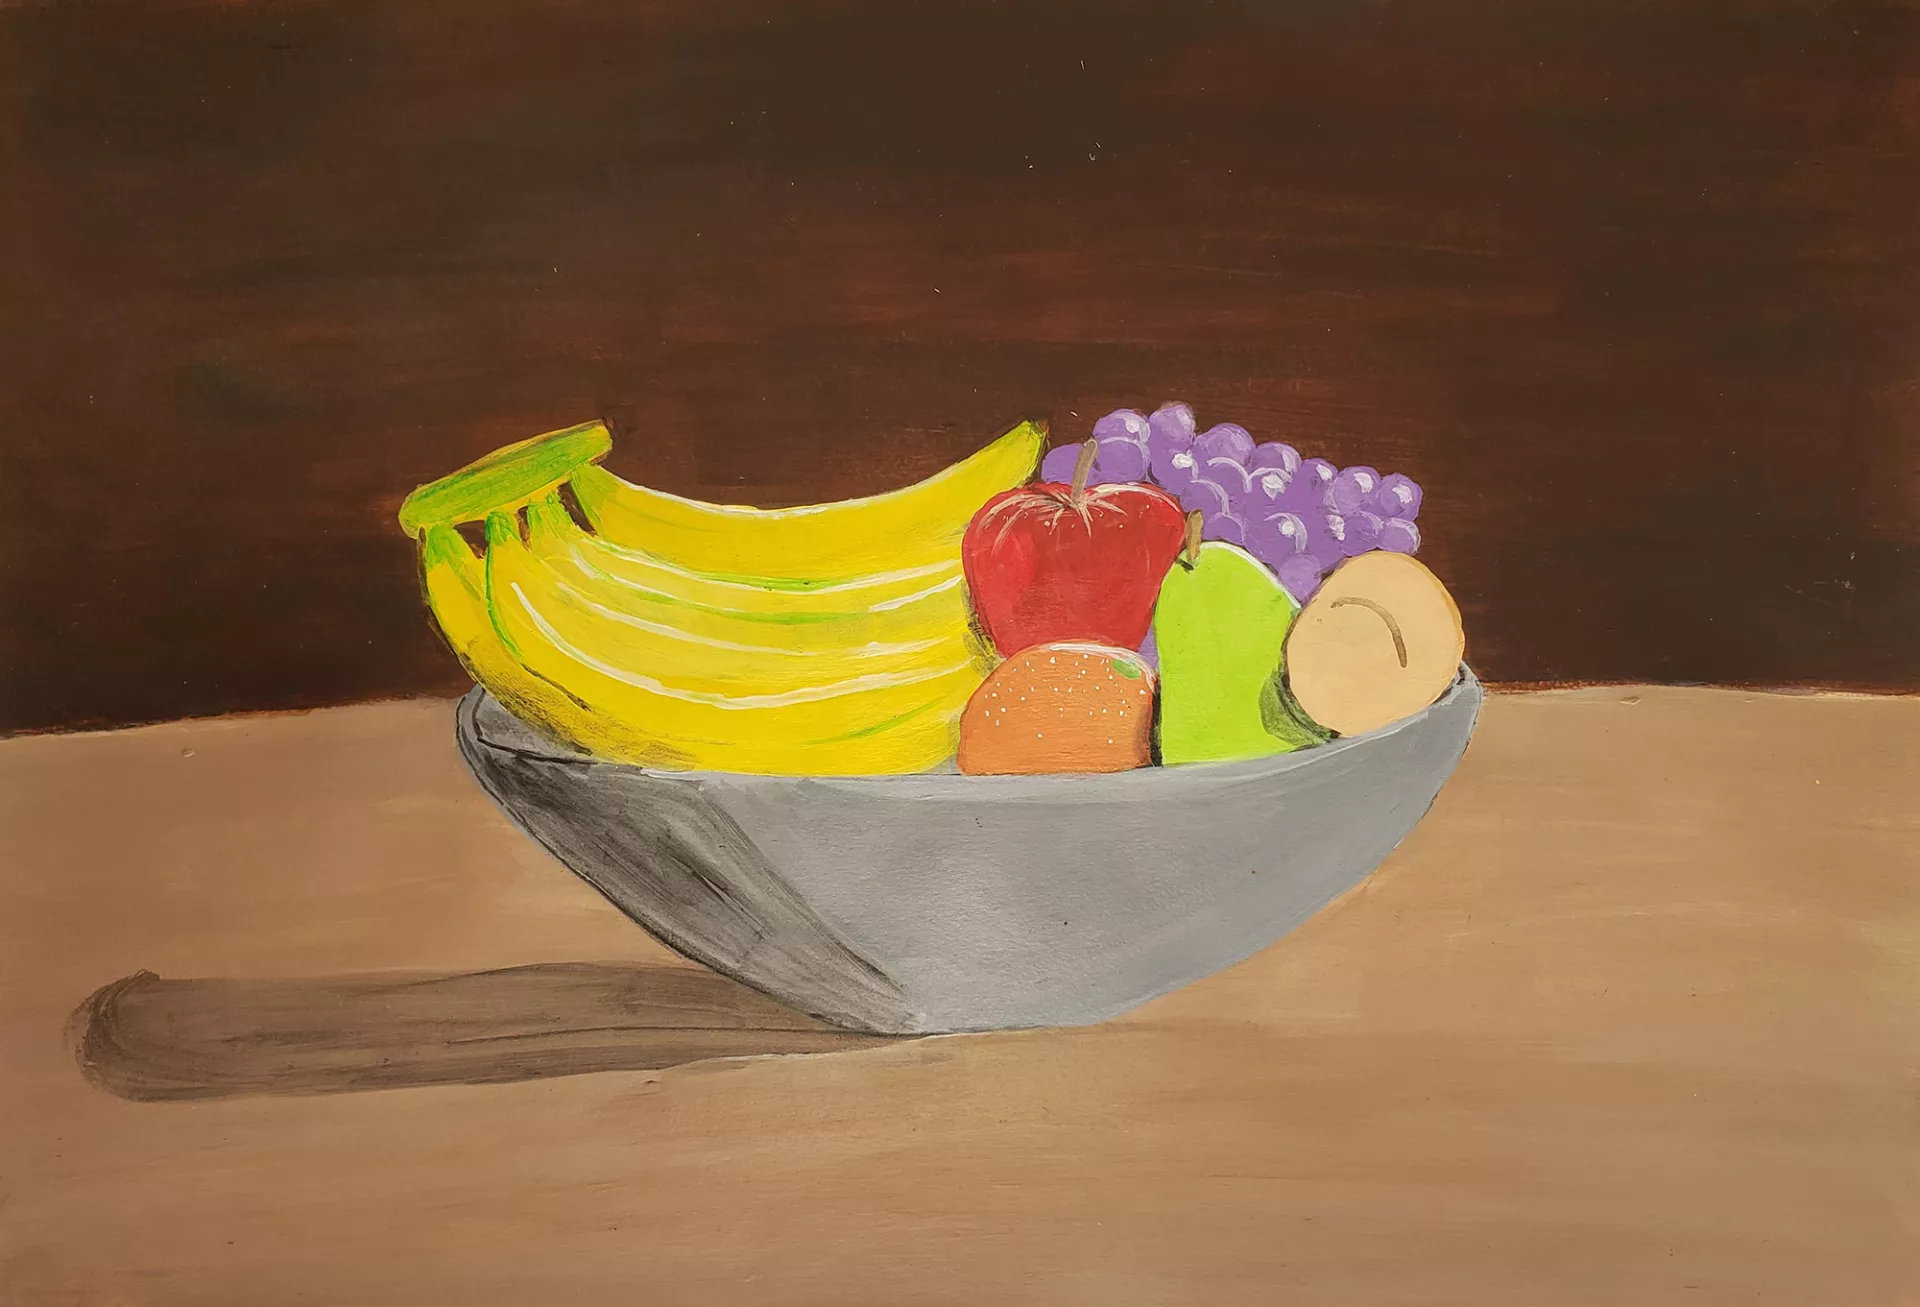 Angel Rodriguez Fruit Bowl, 2018 This still life painting features various fruit in a bowl. The objects have been painted in a way that is simplified, representational, and elegant. The colorful fruit stands out against the gray bowl and the light and dark browns of the background.  Acrylic on paper, 12” x 18”